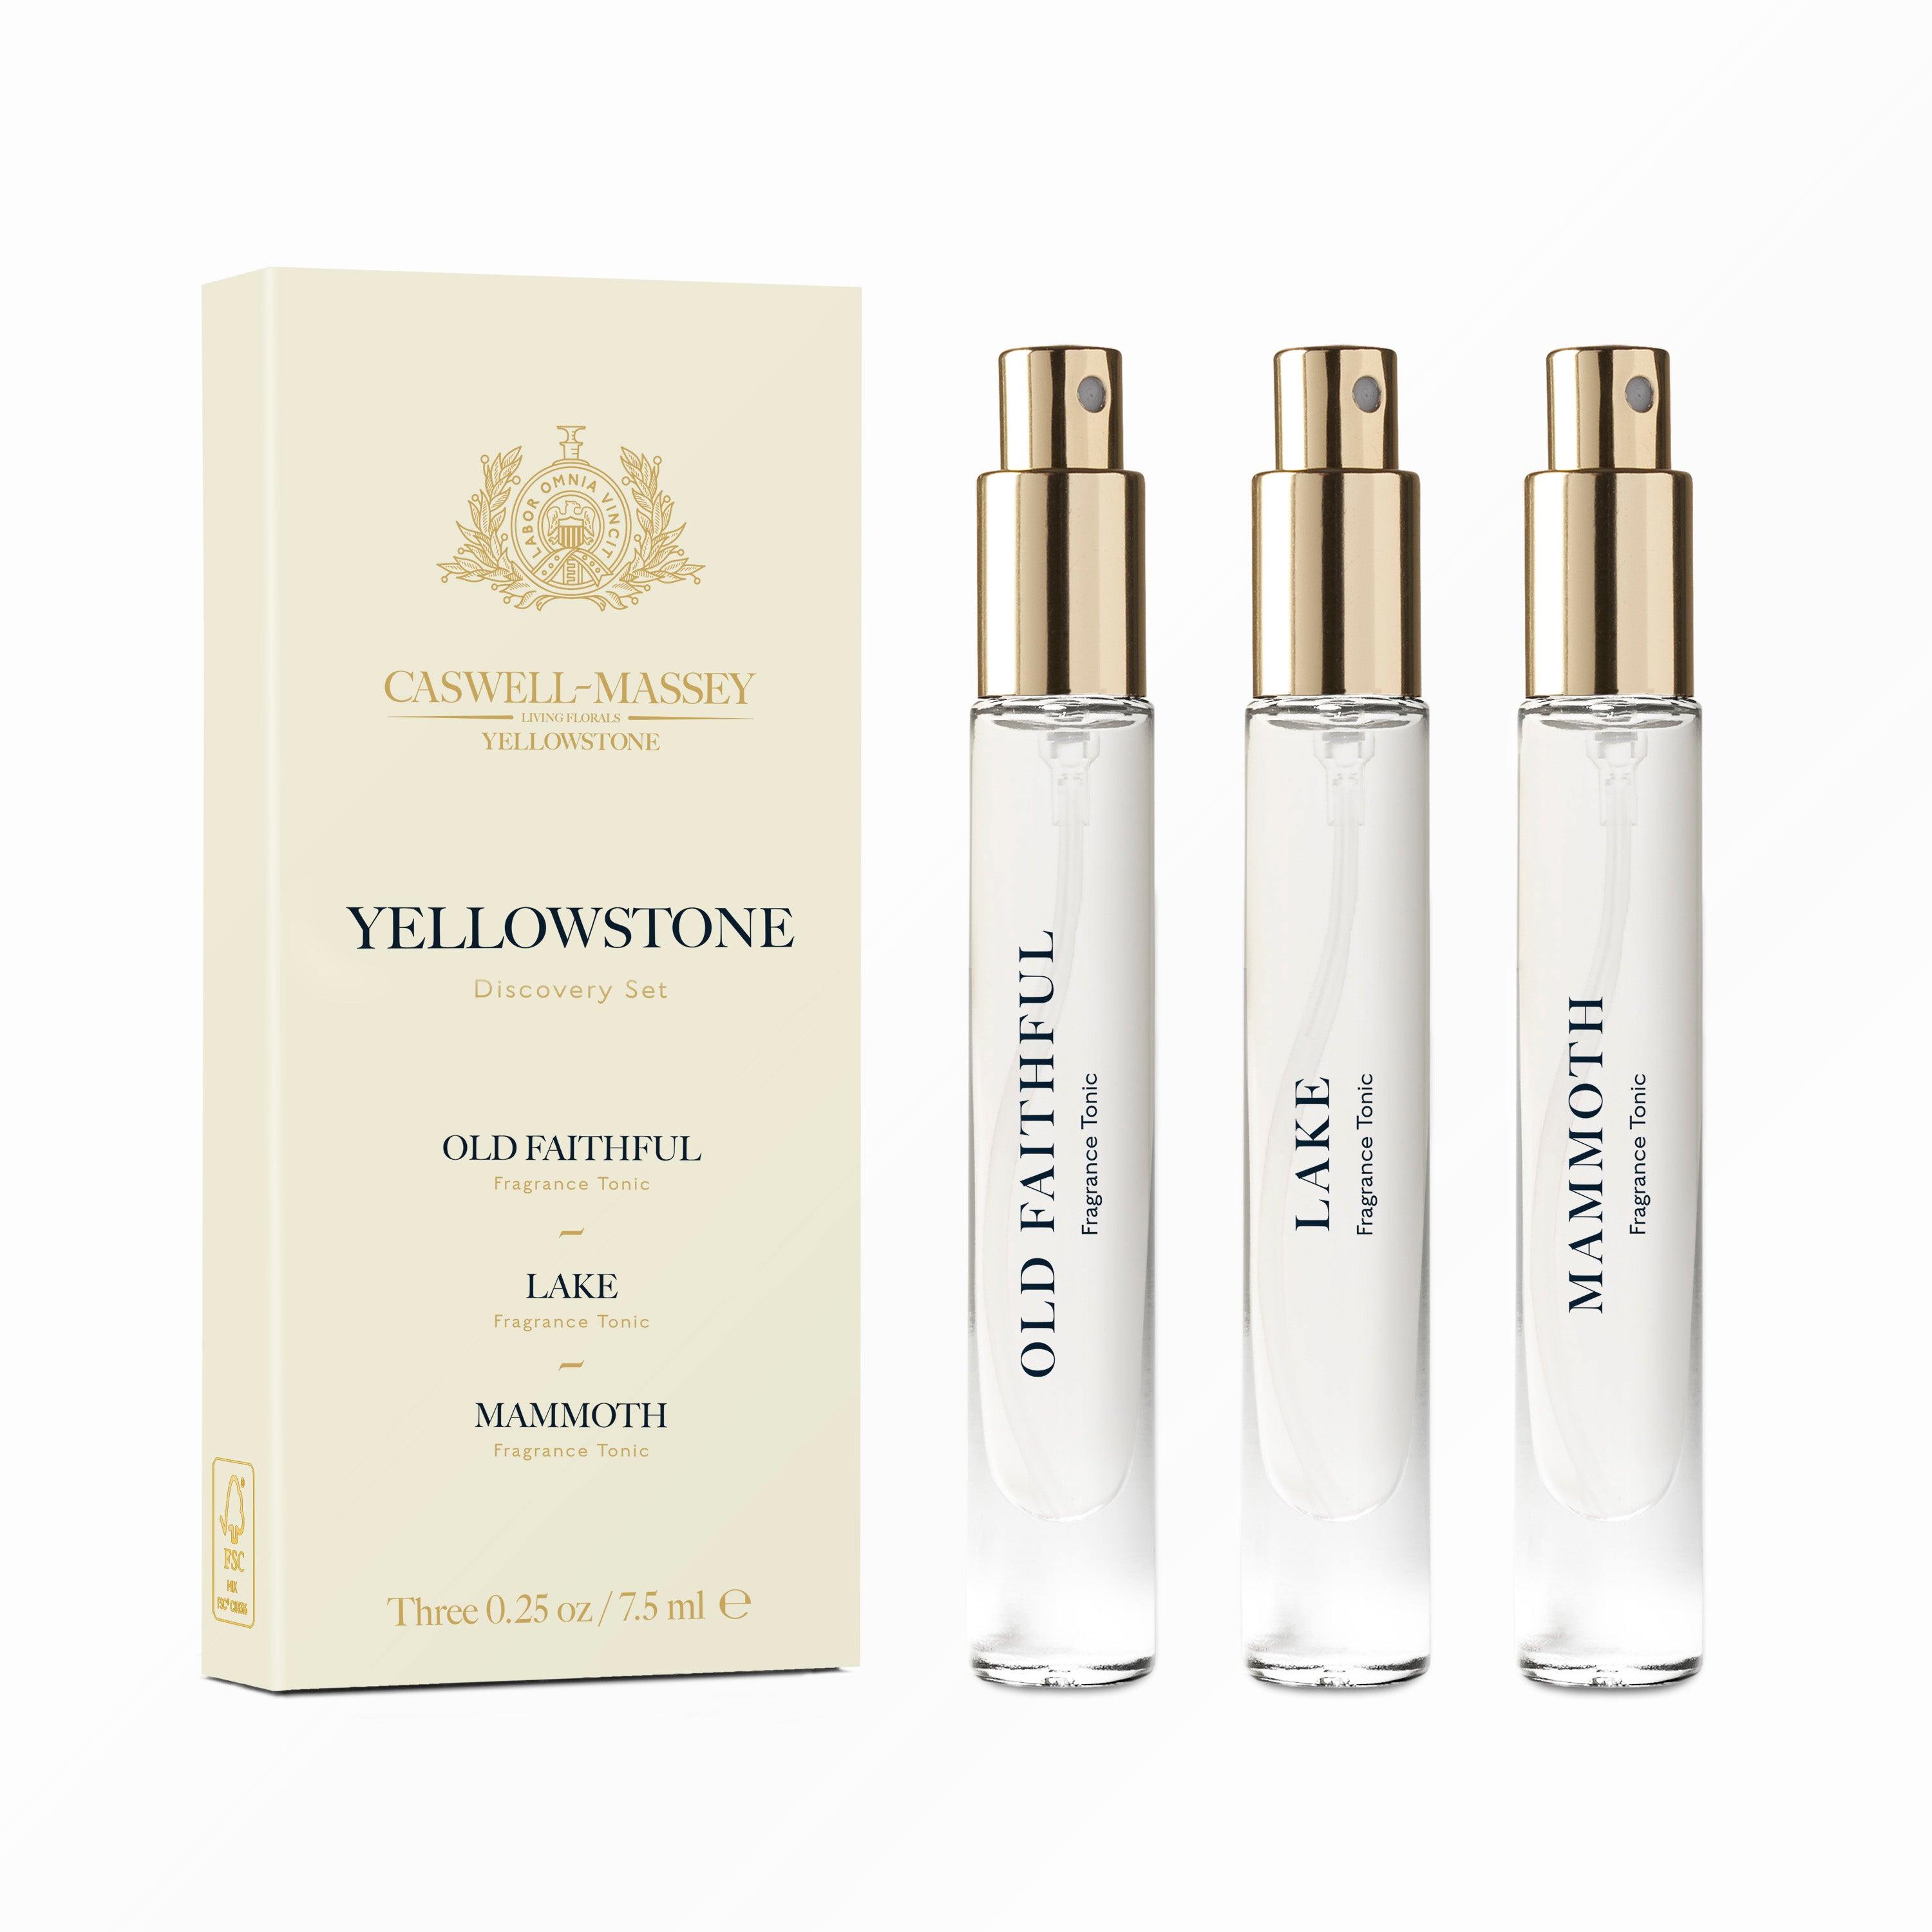 Caswell-Massey Yellowstone Fragrance Tonic Discovery Set: three 7.5ml fragrance vials with spray caps of Lake, Mammoth, and Old Faithful Fragrances for men and women